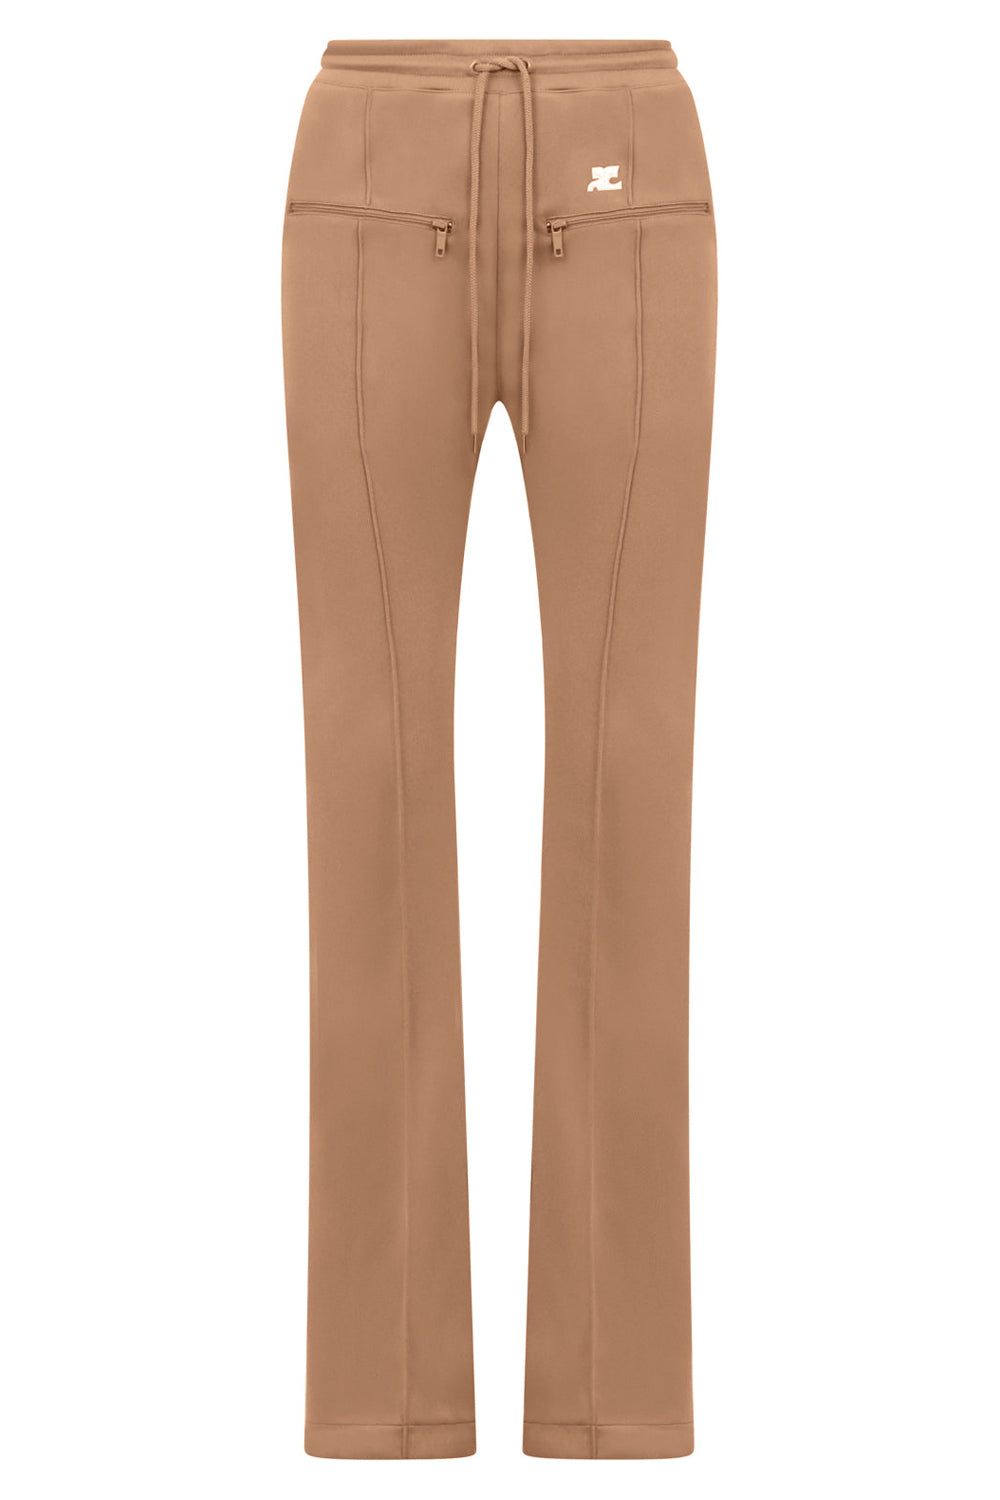 COURREGES RTW SPORT TRACKPANTS | BISCUIT